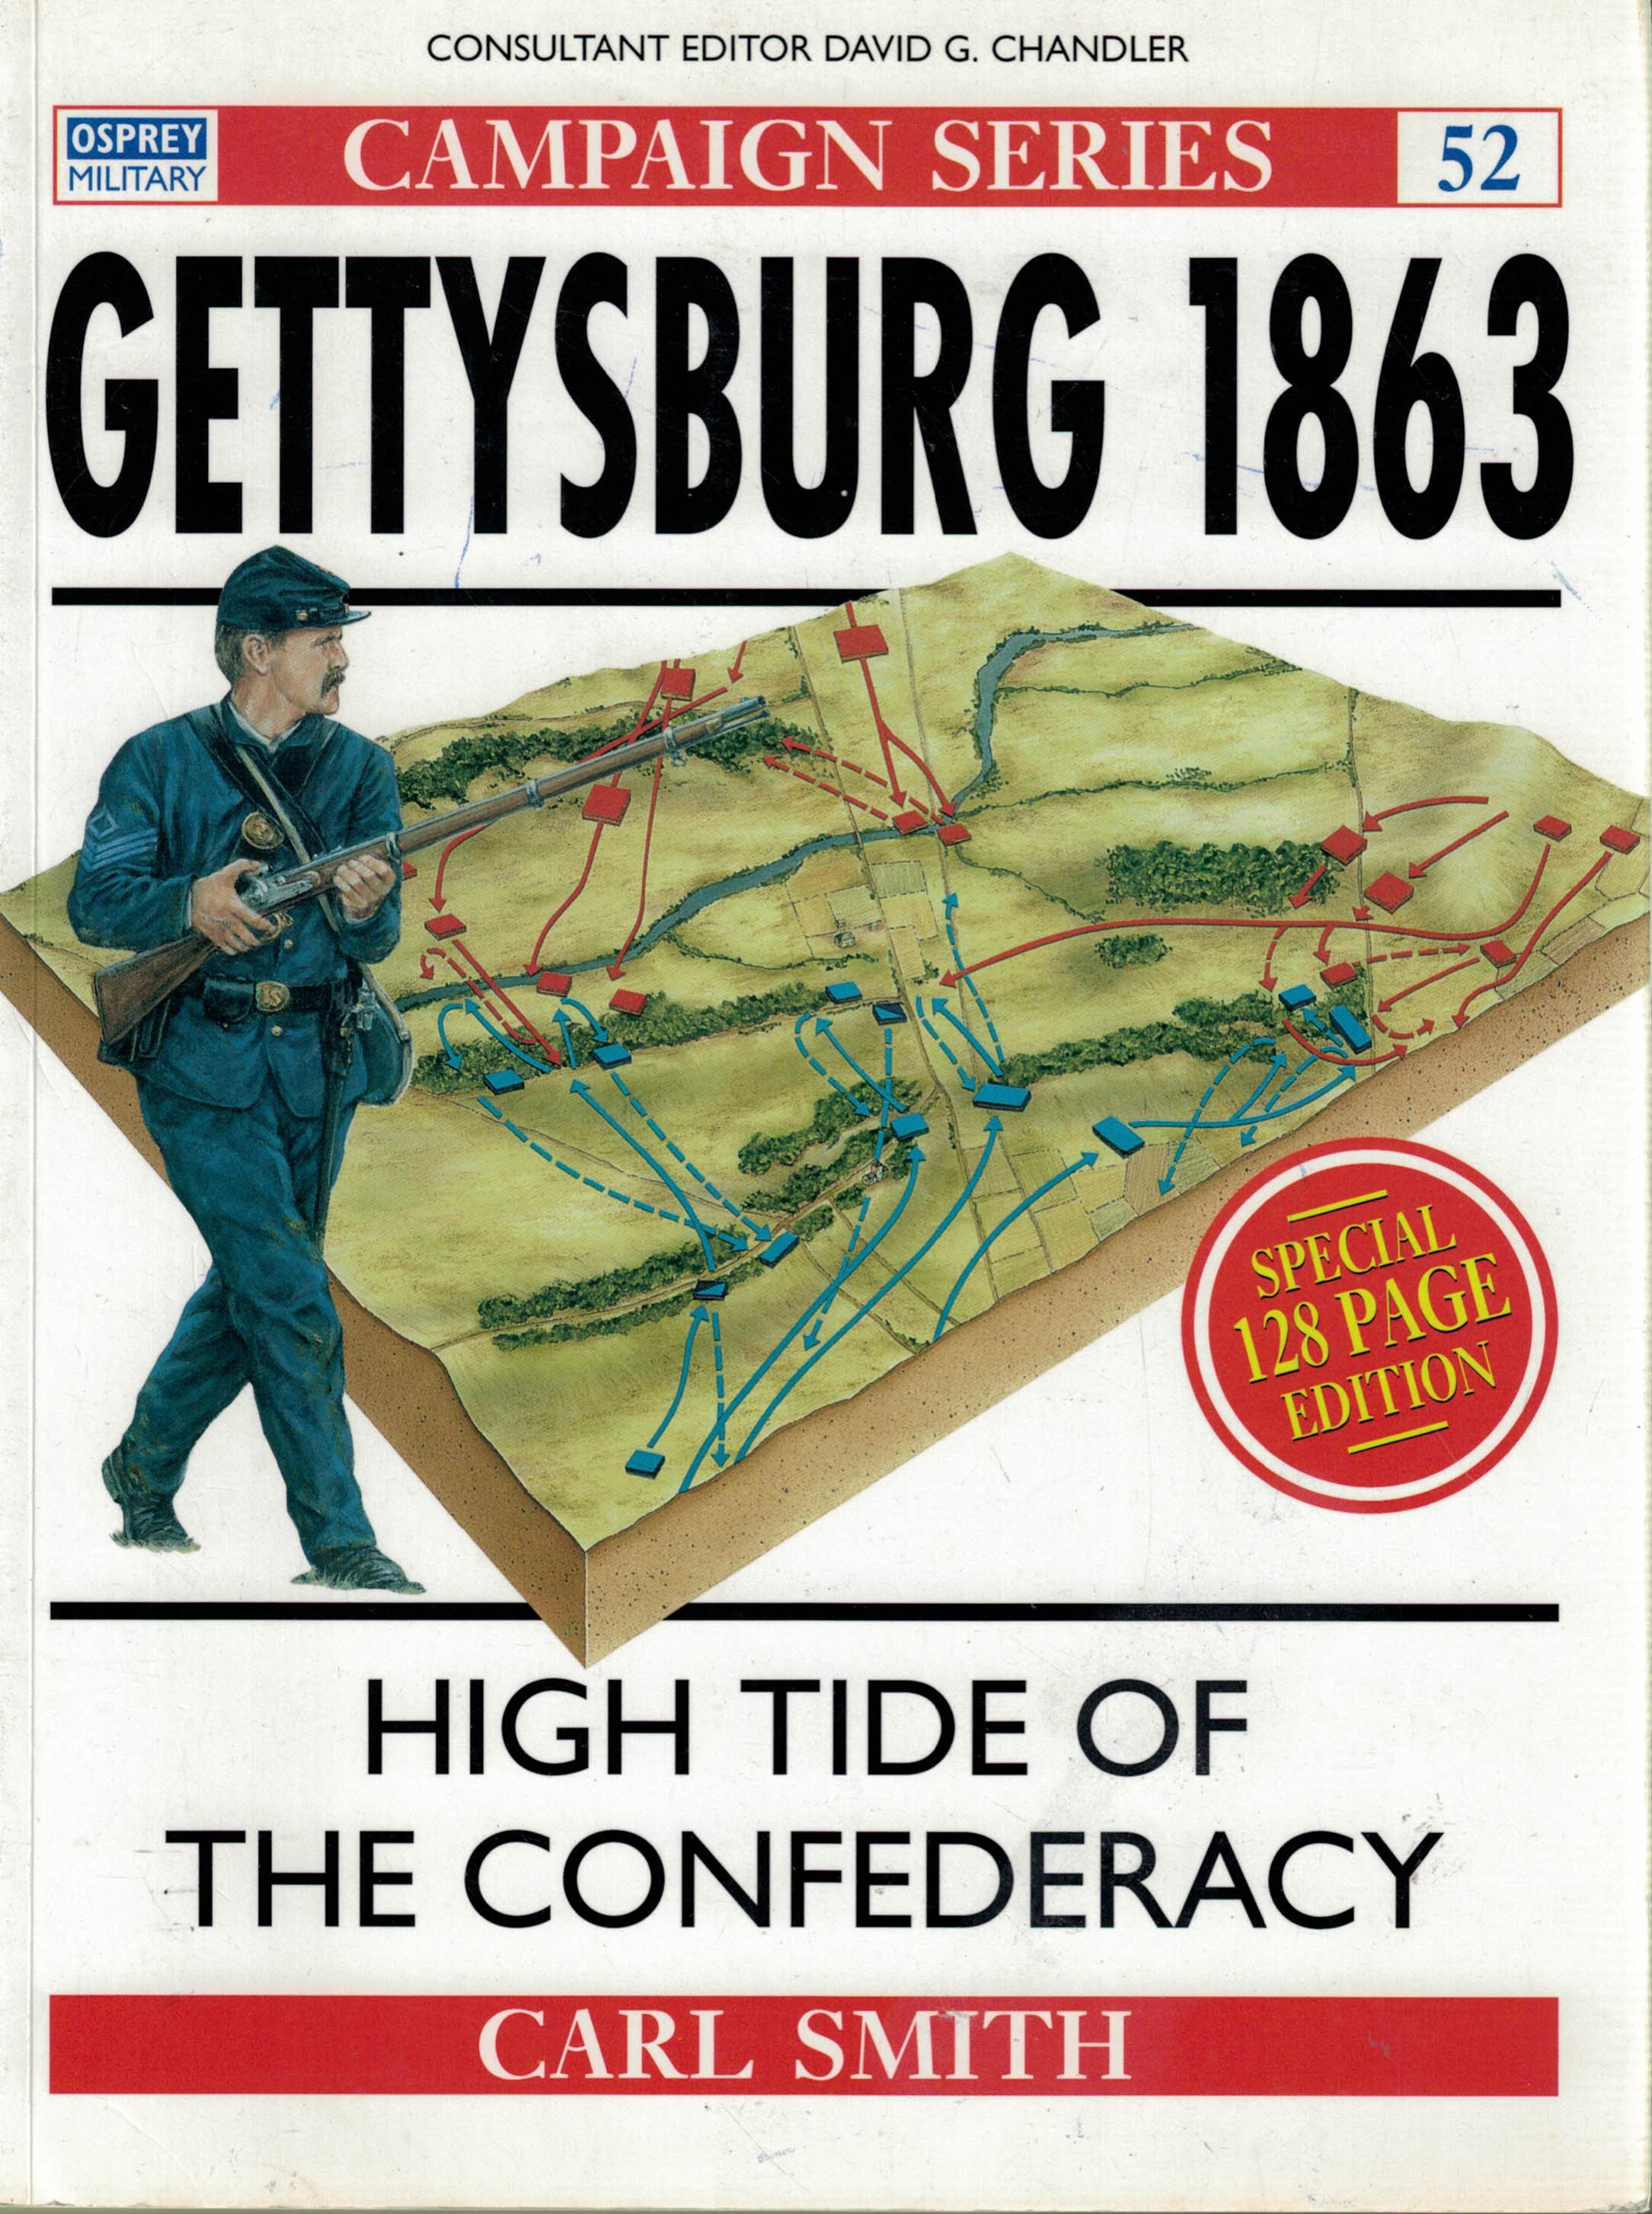 Gettysburg 1863. High Tide of the Confederacy. Campaign series no. 52.